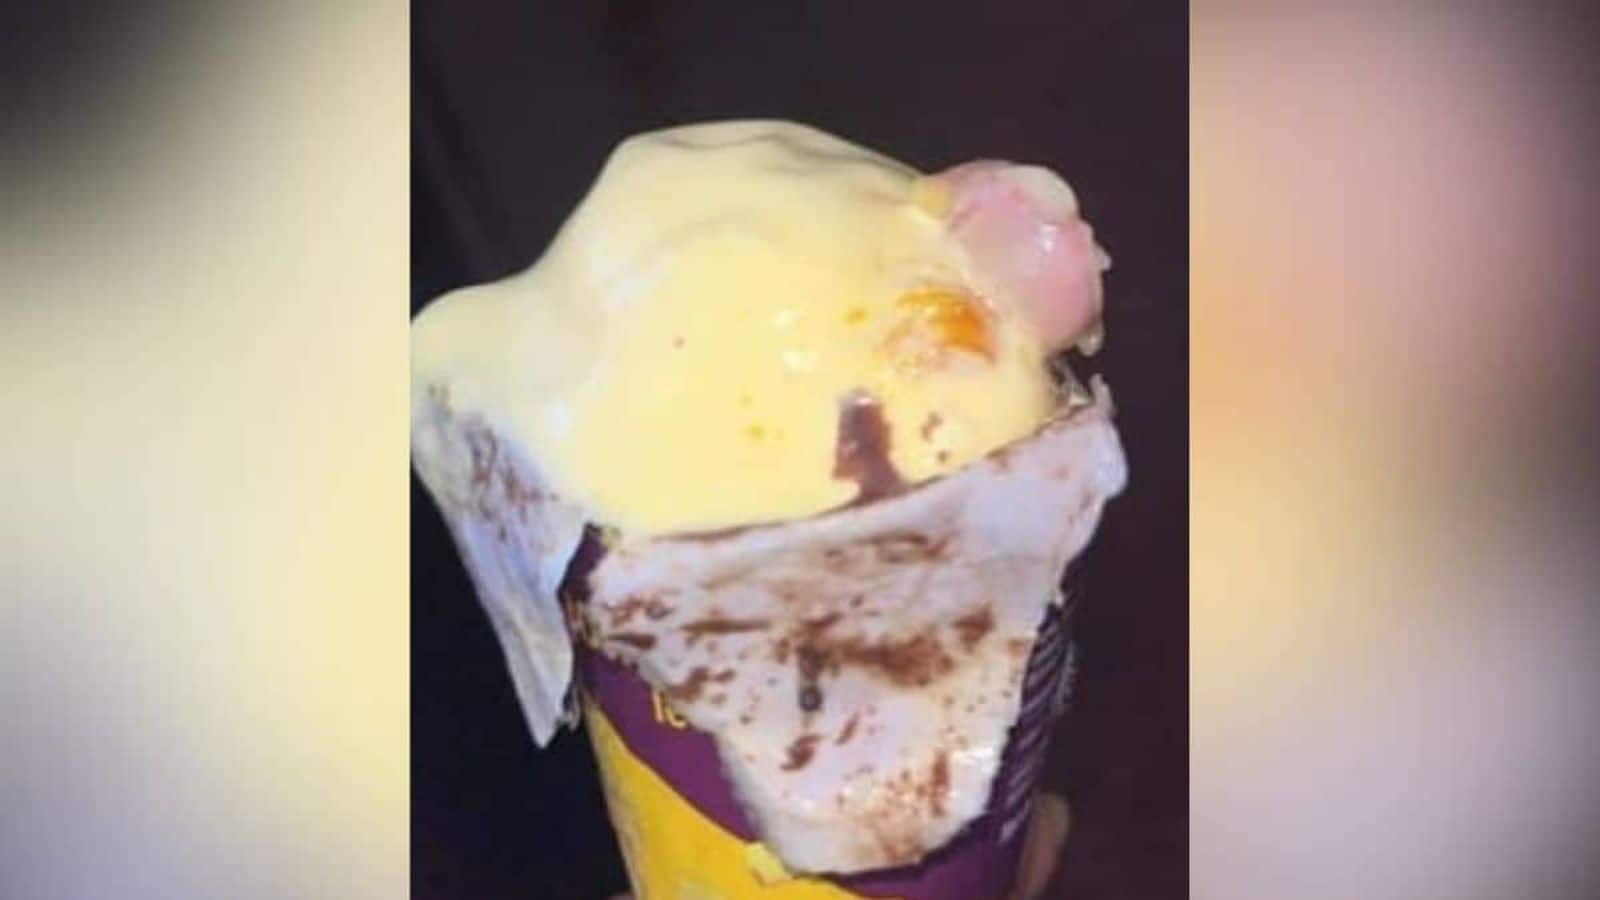 Finger found in ice cream may be employee's: Police 